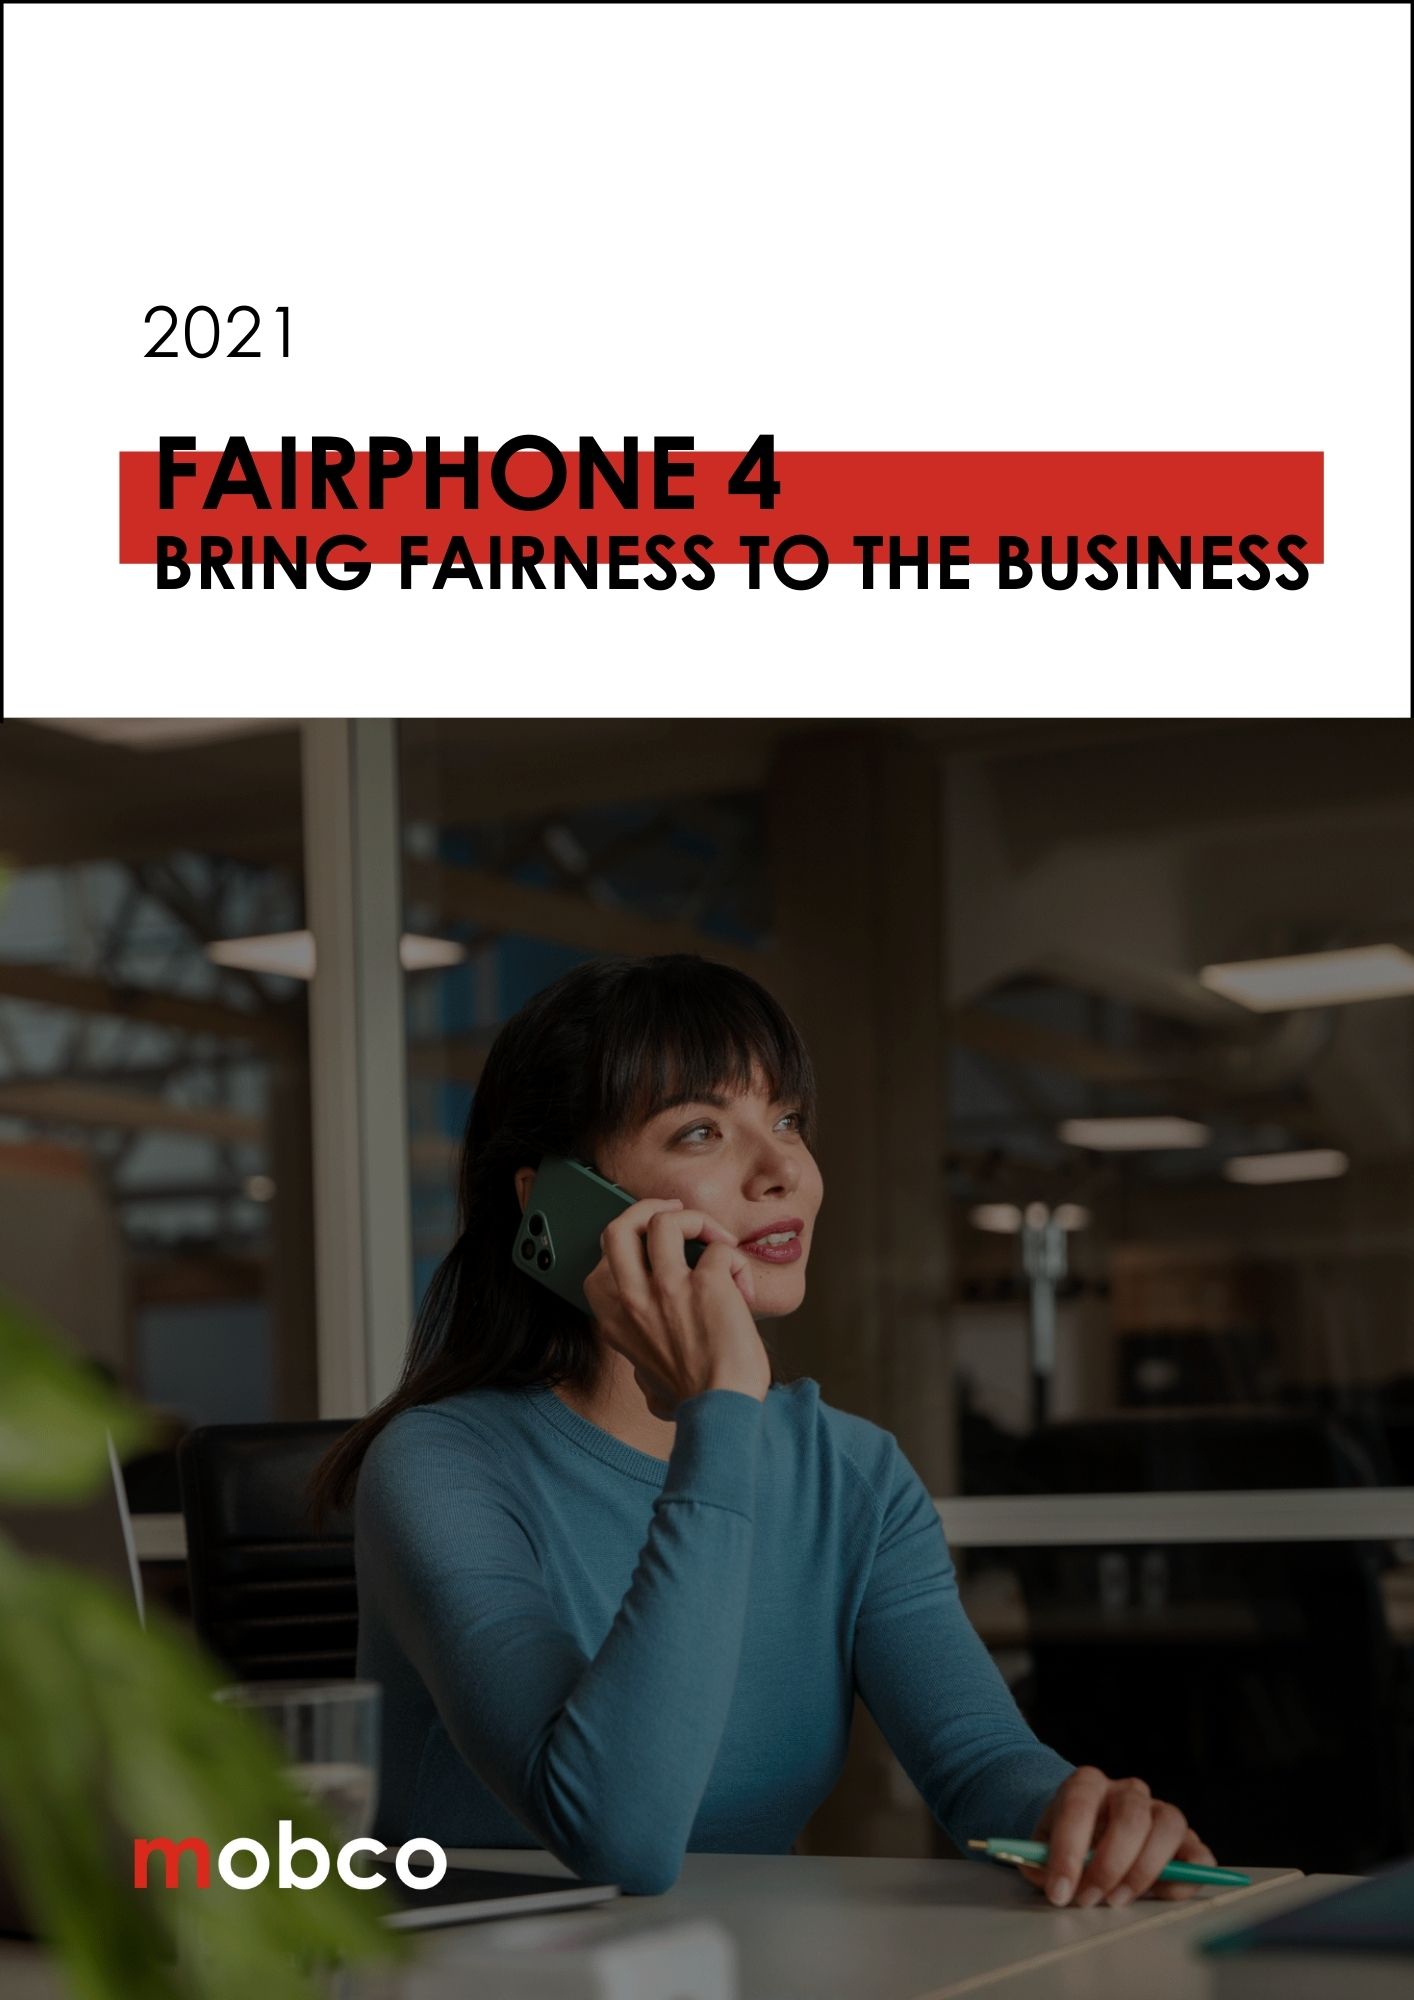 Download Our Latest, Free Whitepaper To Discover If The Sustainable Smartphone, Fairphone 4, Meets Your Business's Needs & Requirements